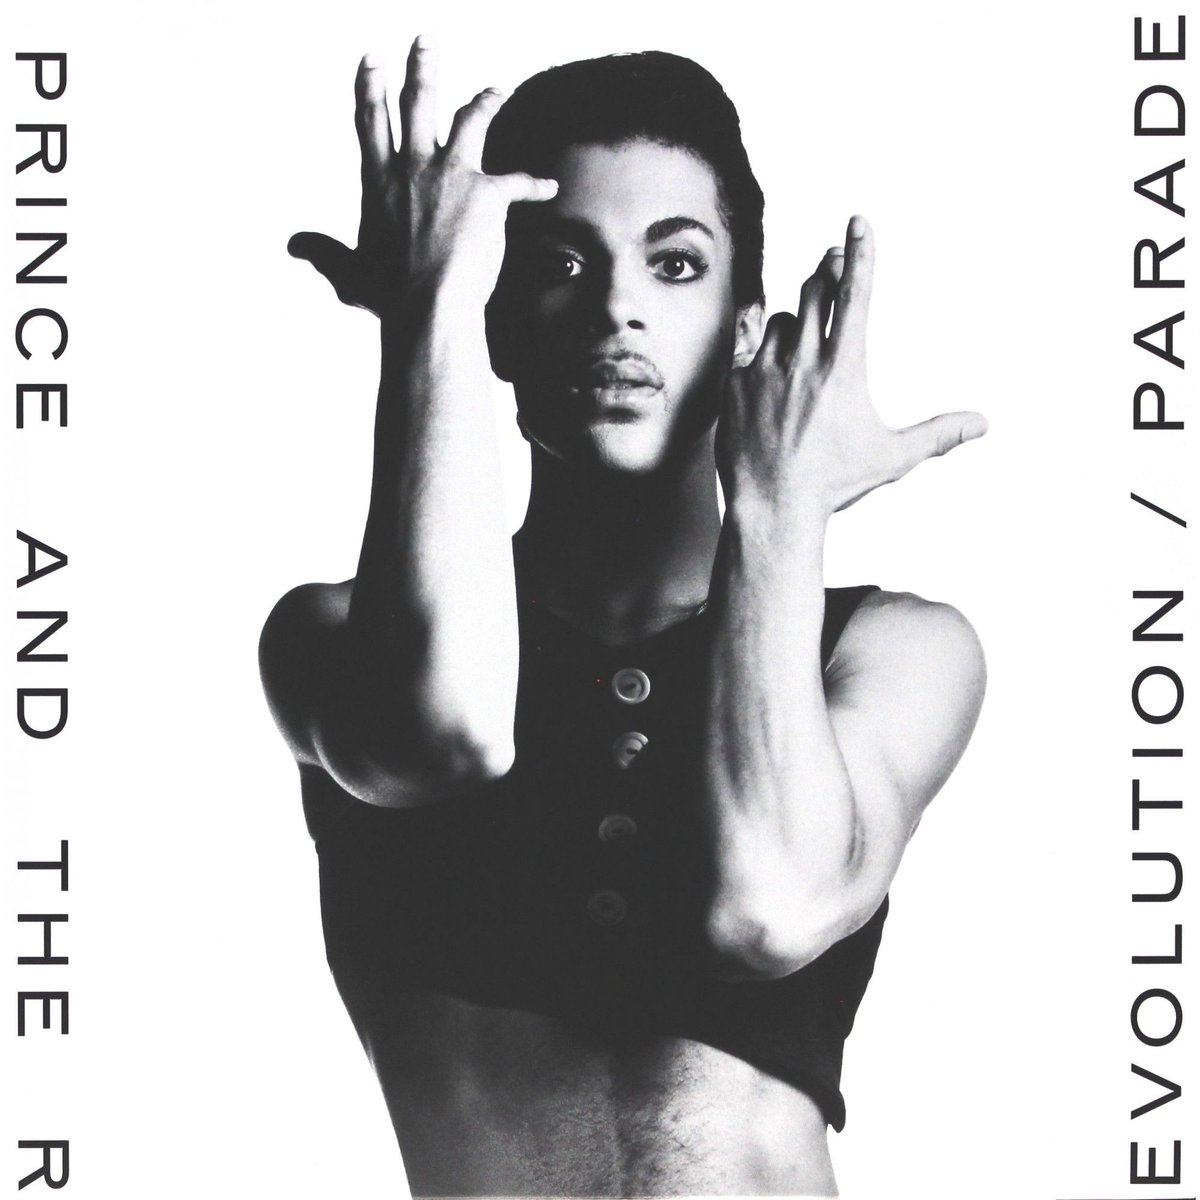 Part 3 of the Monster  #Thread on Prince’s album Parade by  @deejayumb and  @EdgarKruize. This is the last entry and looks at a possible future for Parade. Part 1 can be found here:  https://twitter.com/deejayumb/status/1245050710787600388 Part 2 can be found here:  https://twitter.com/deejayumb/status/1245362256742944769